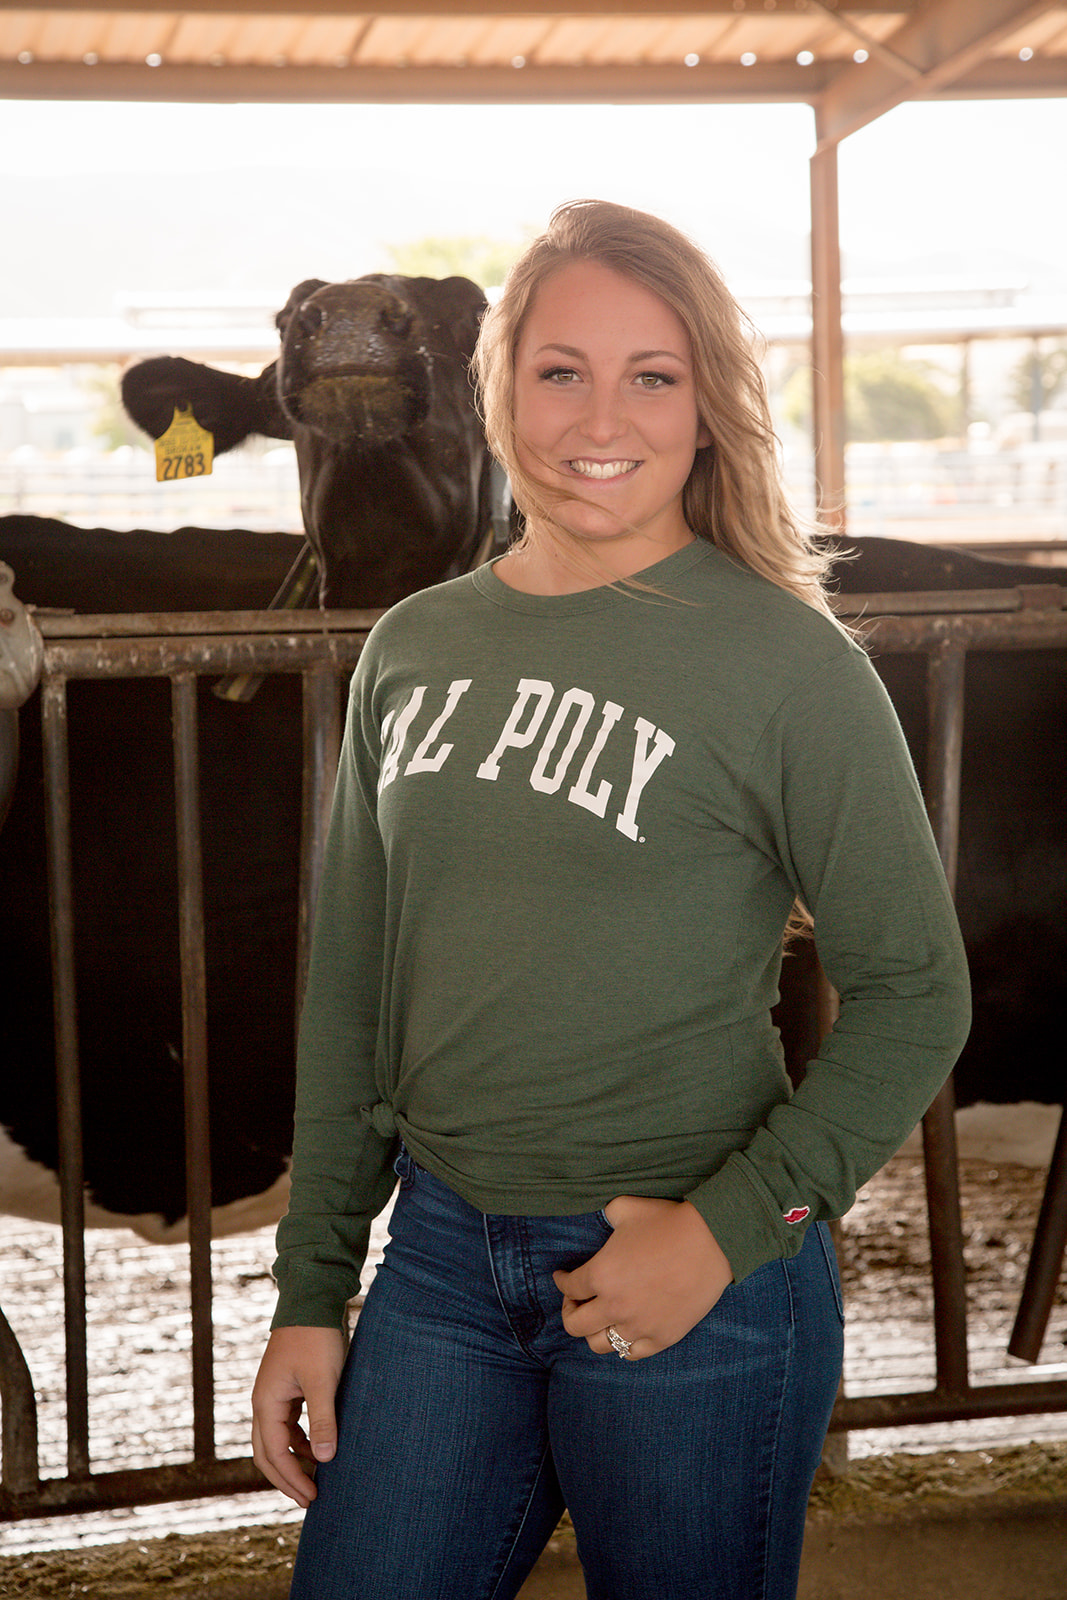 Dairy Science senior took cal poly senior photos for graduation at the dairy ranch